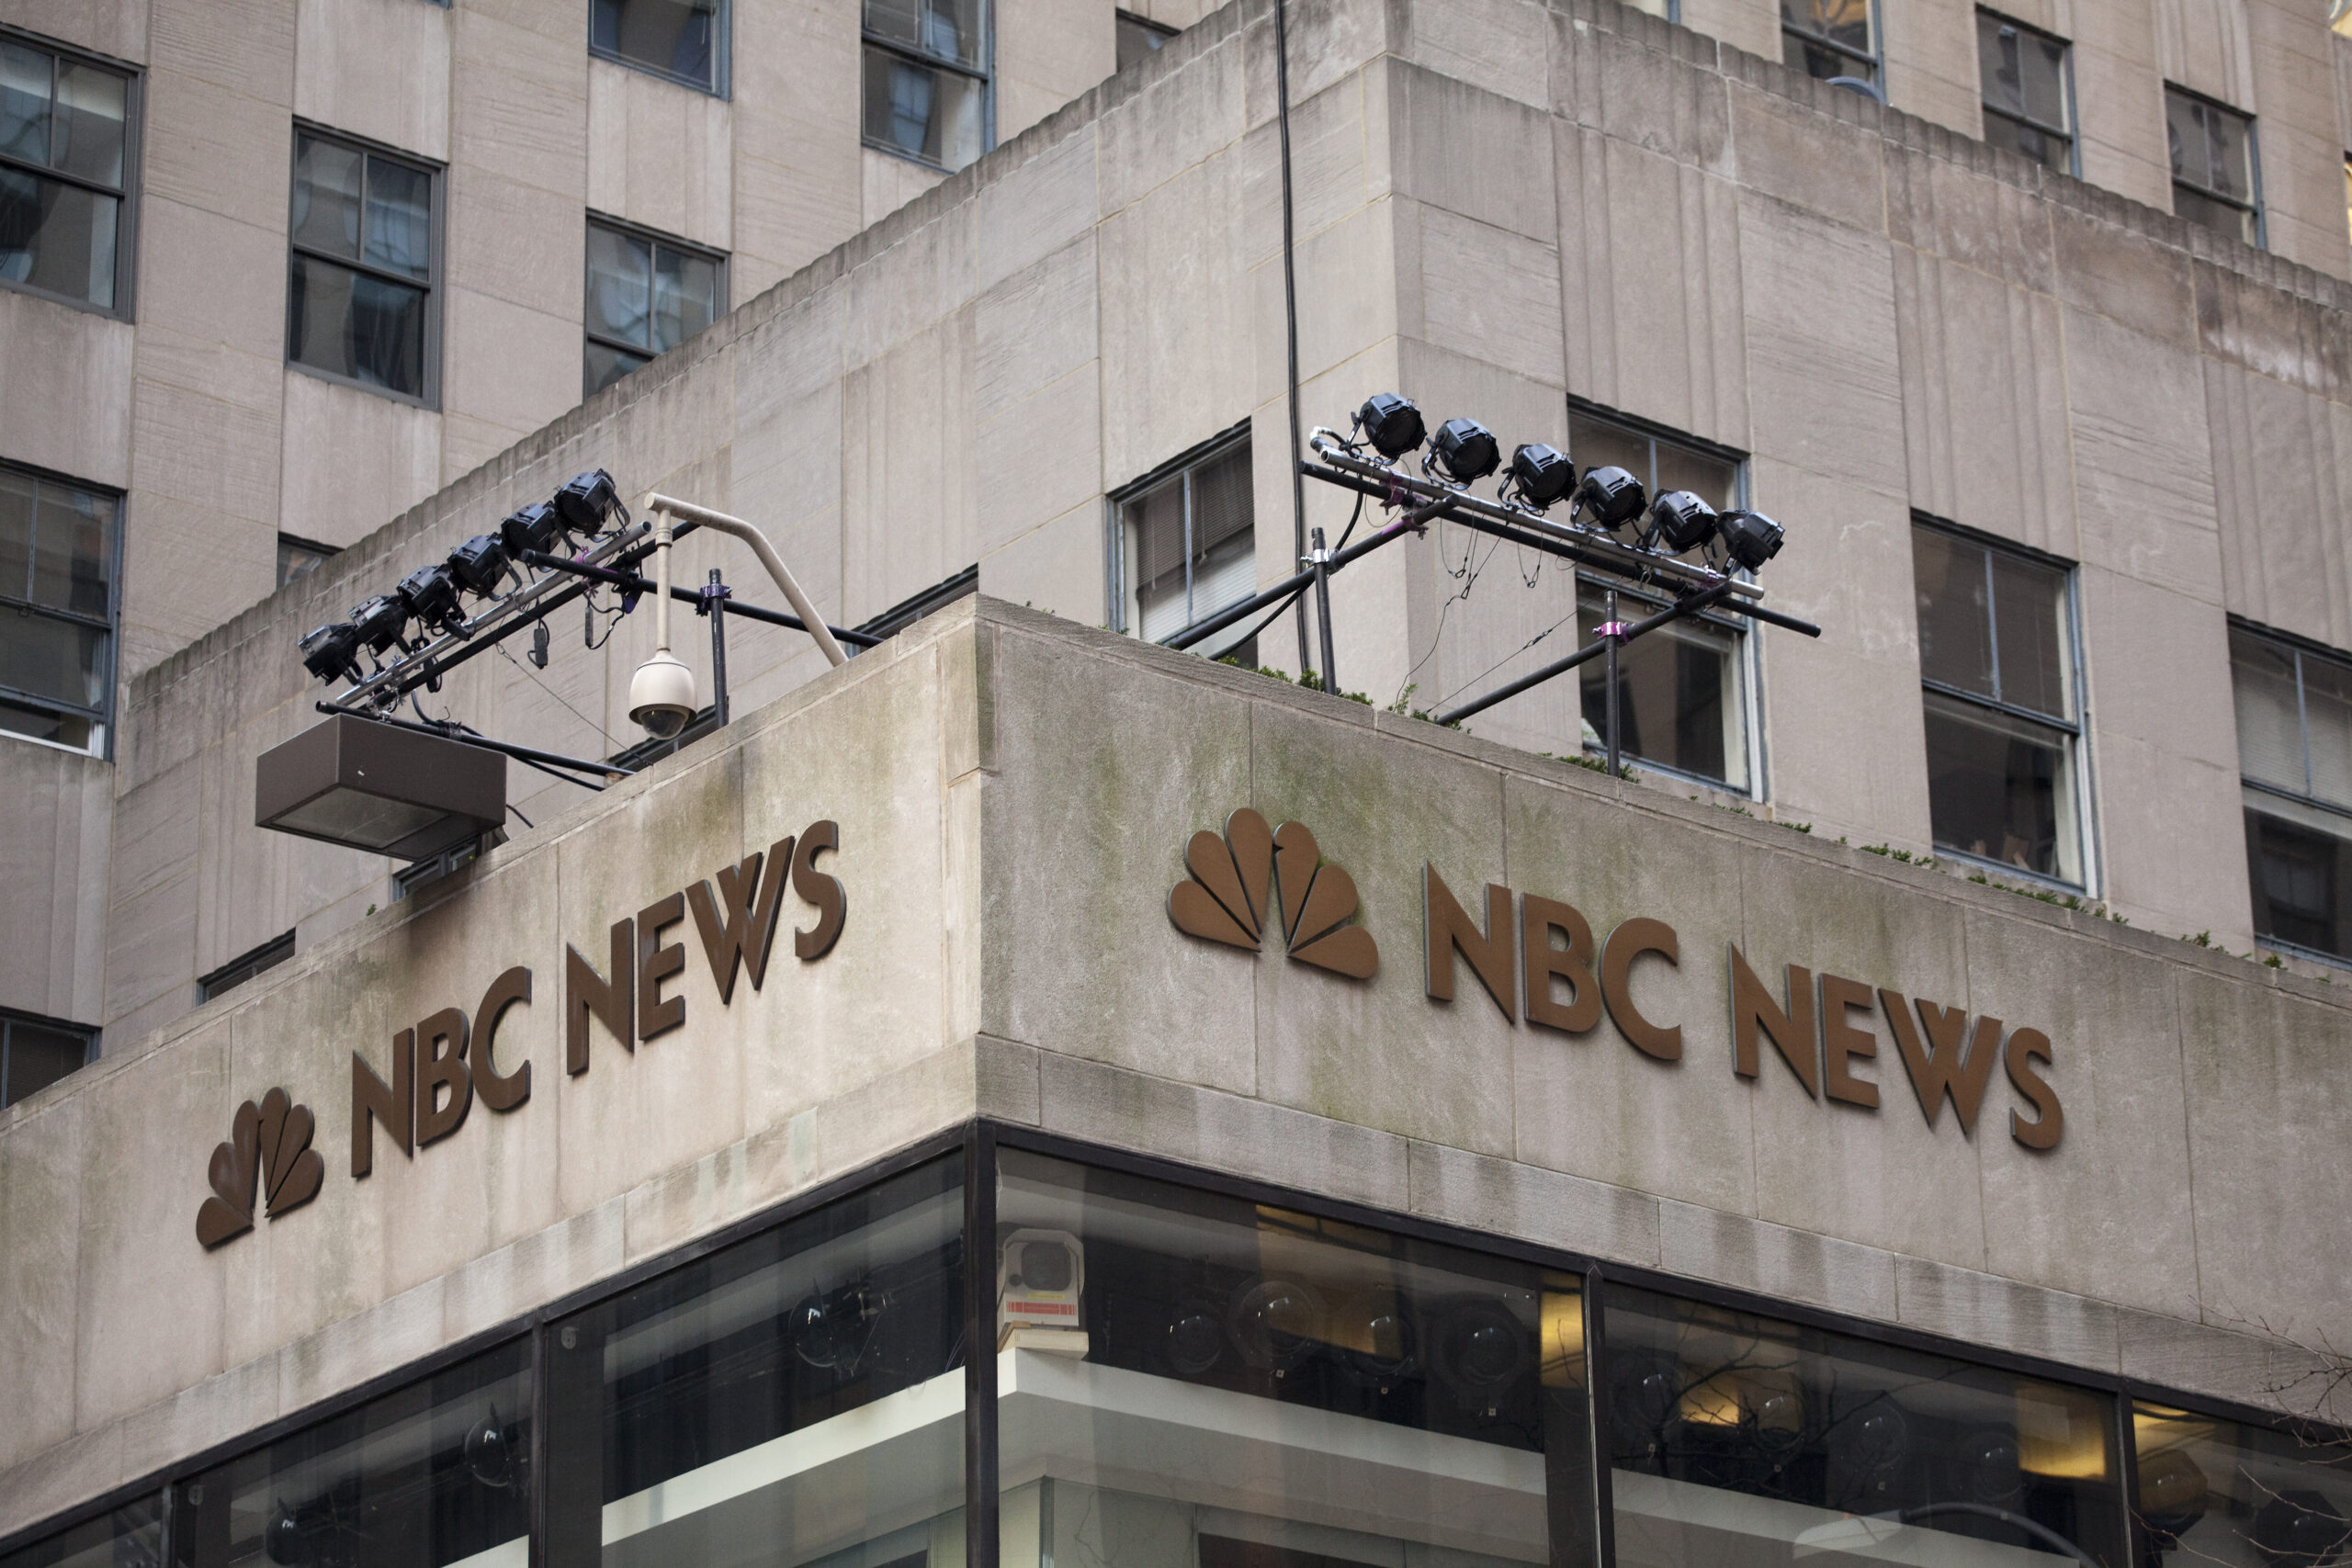 NBC News Union Blasts Return-to-Office Policy and Purge of Remote Colleagues (mediaite.com)